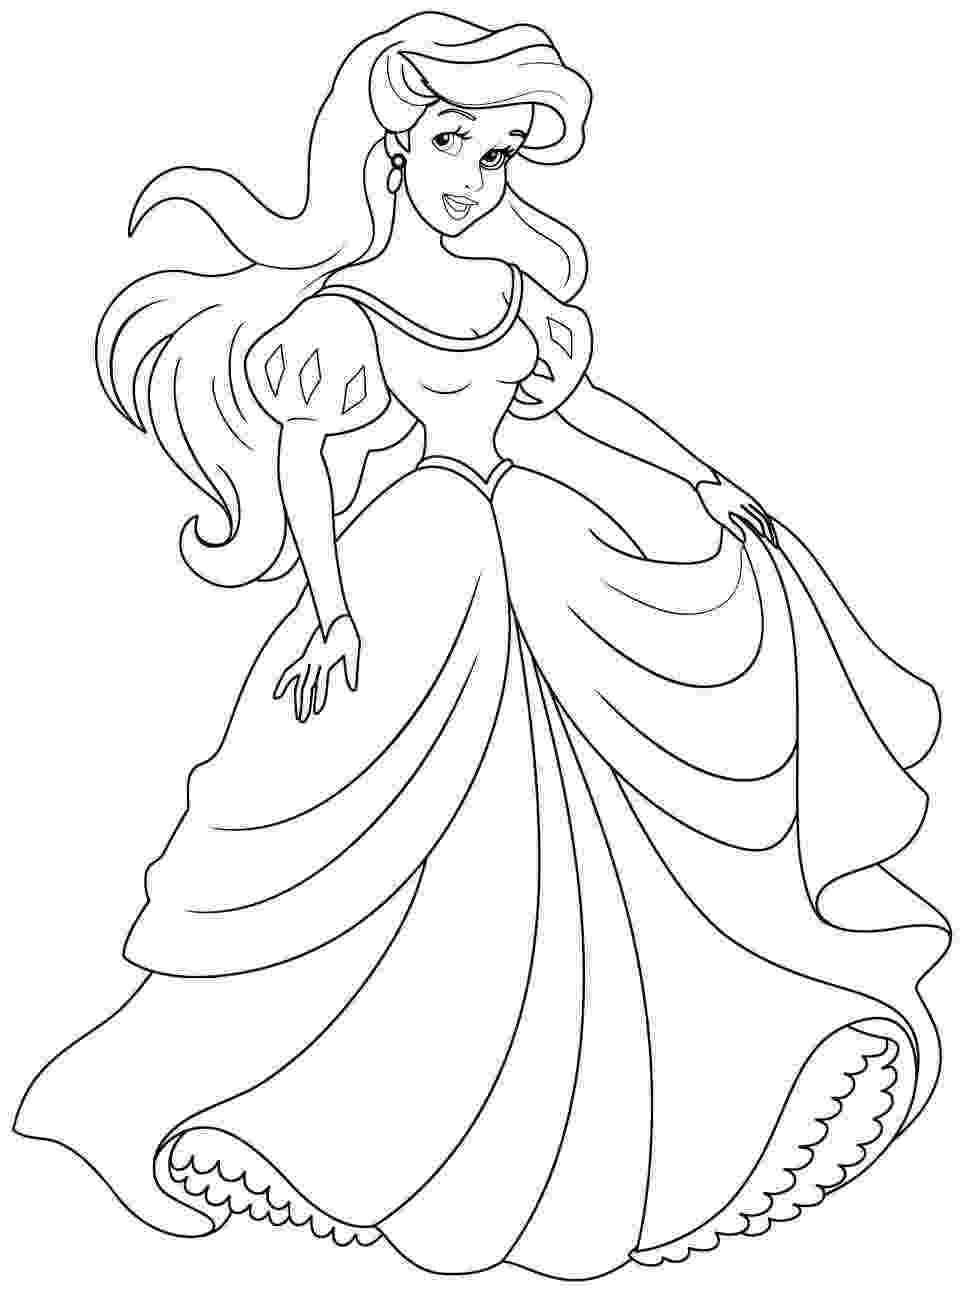 printable coloring pages for disney princess 1000 images about sleeping beauty on pinterest disney princess printable for coloring pages 